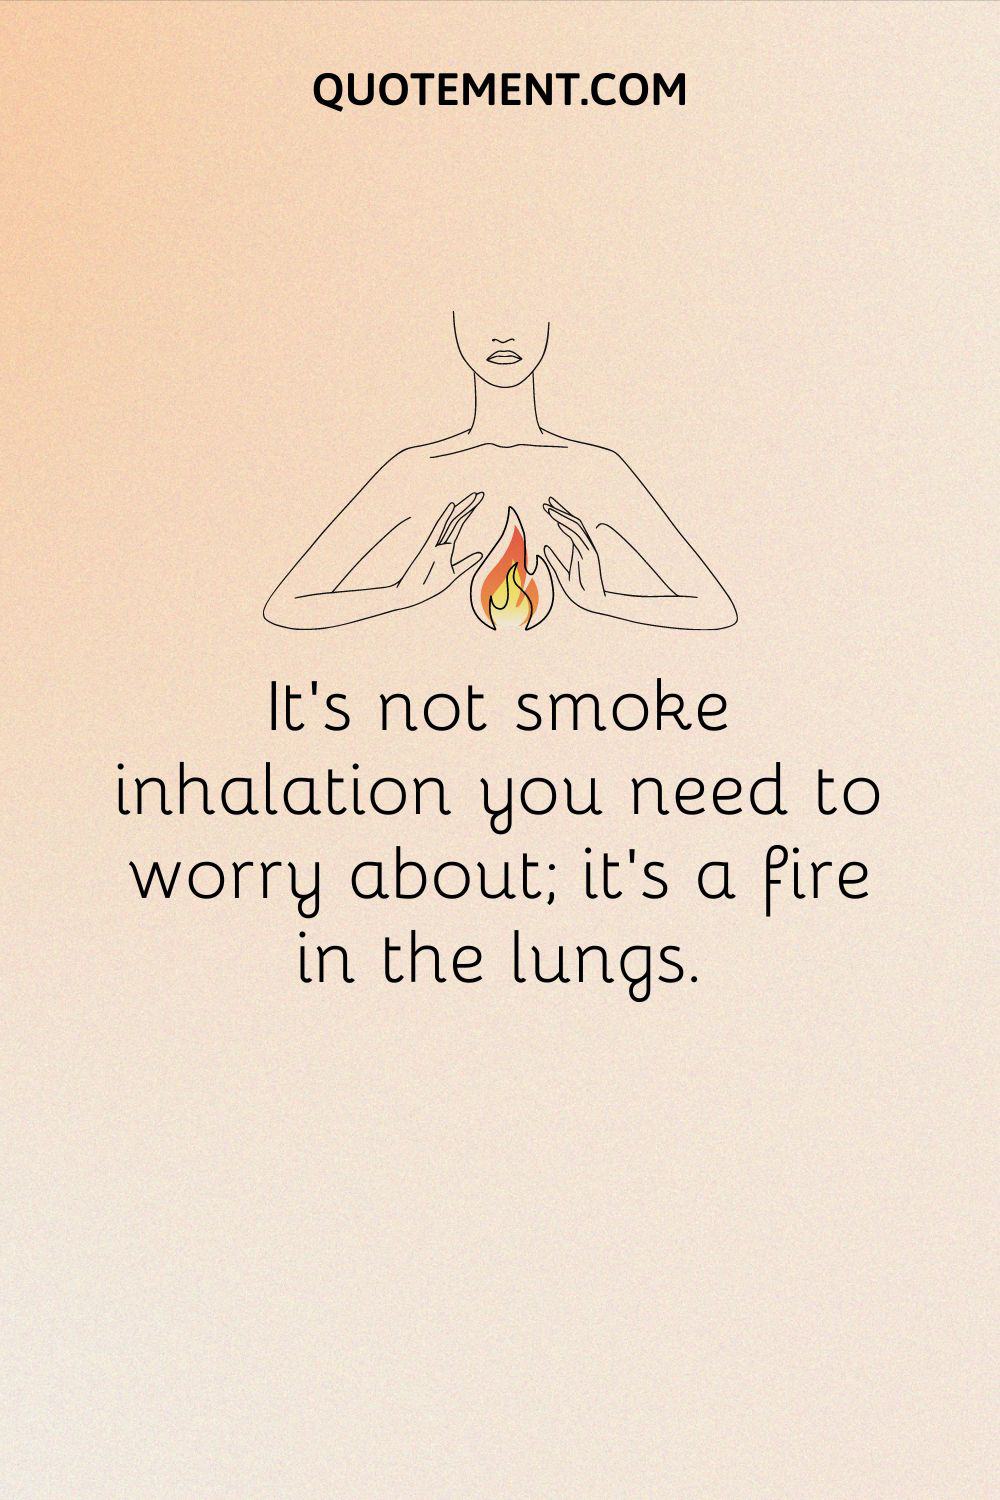 It’s not smoke inhalation you need to worry about; it’s a fire in the lungs